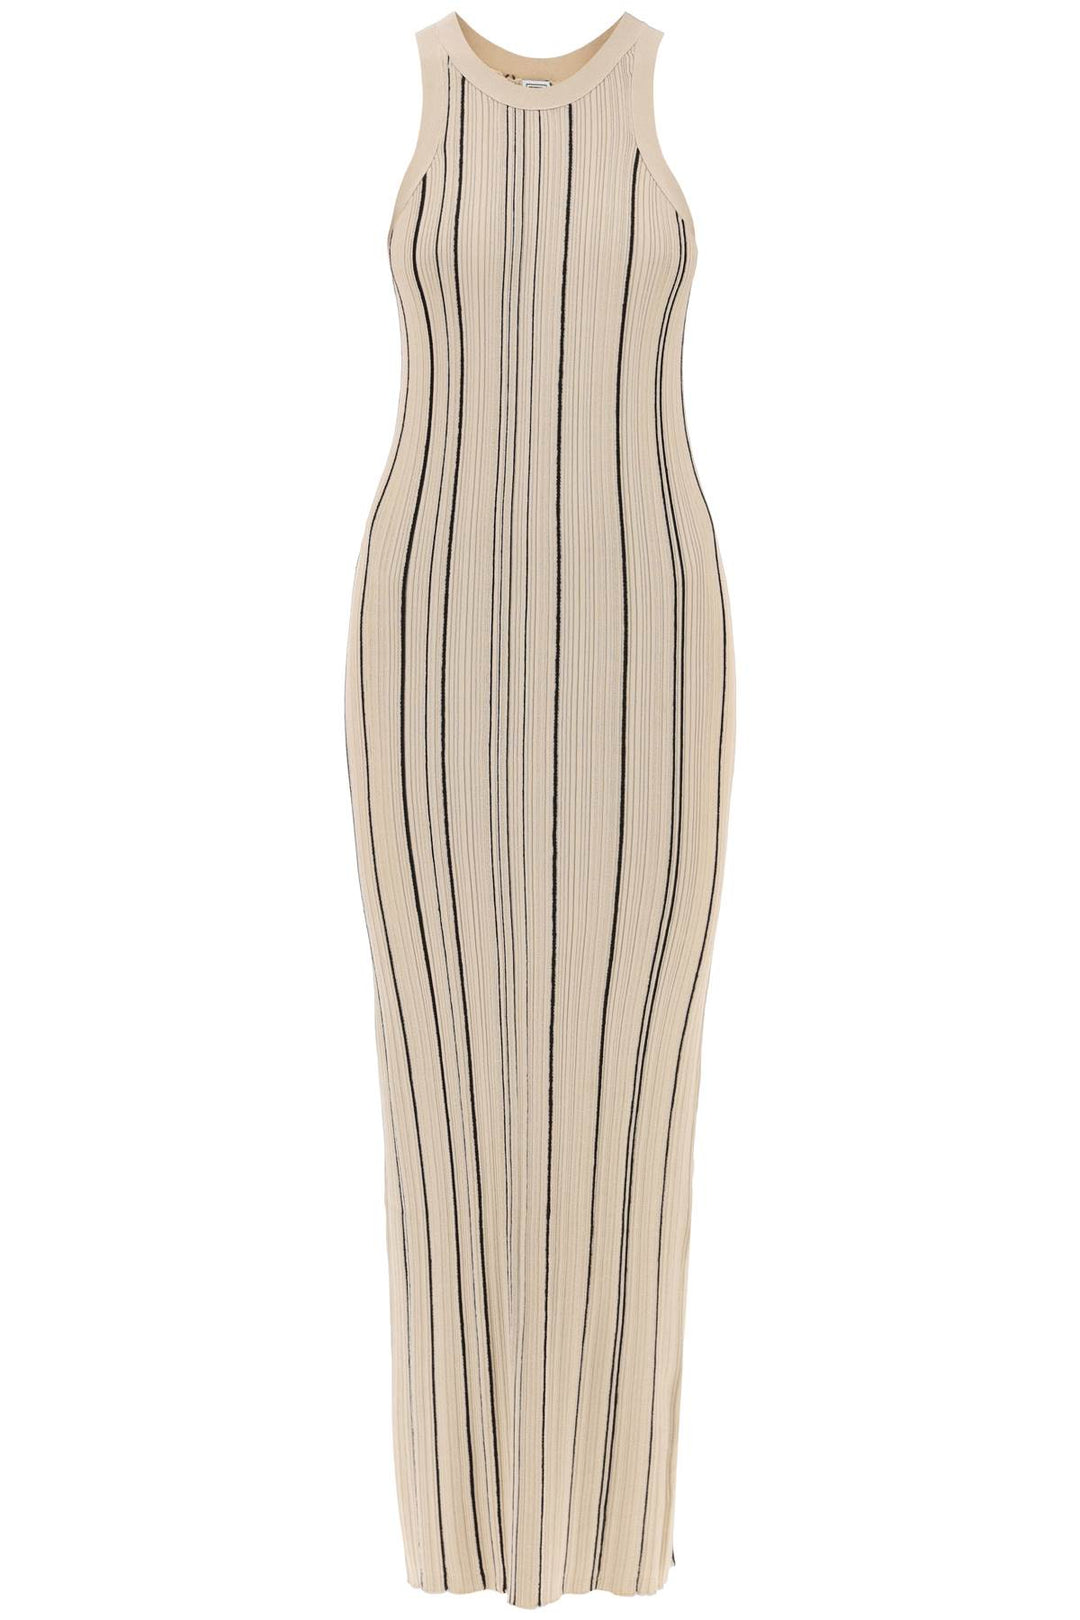 Toteme Replace With Double Quotelong Ribbed Knit Naia Dress In   Beige